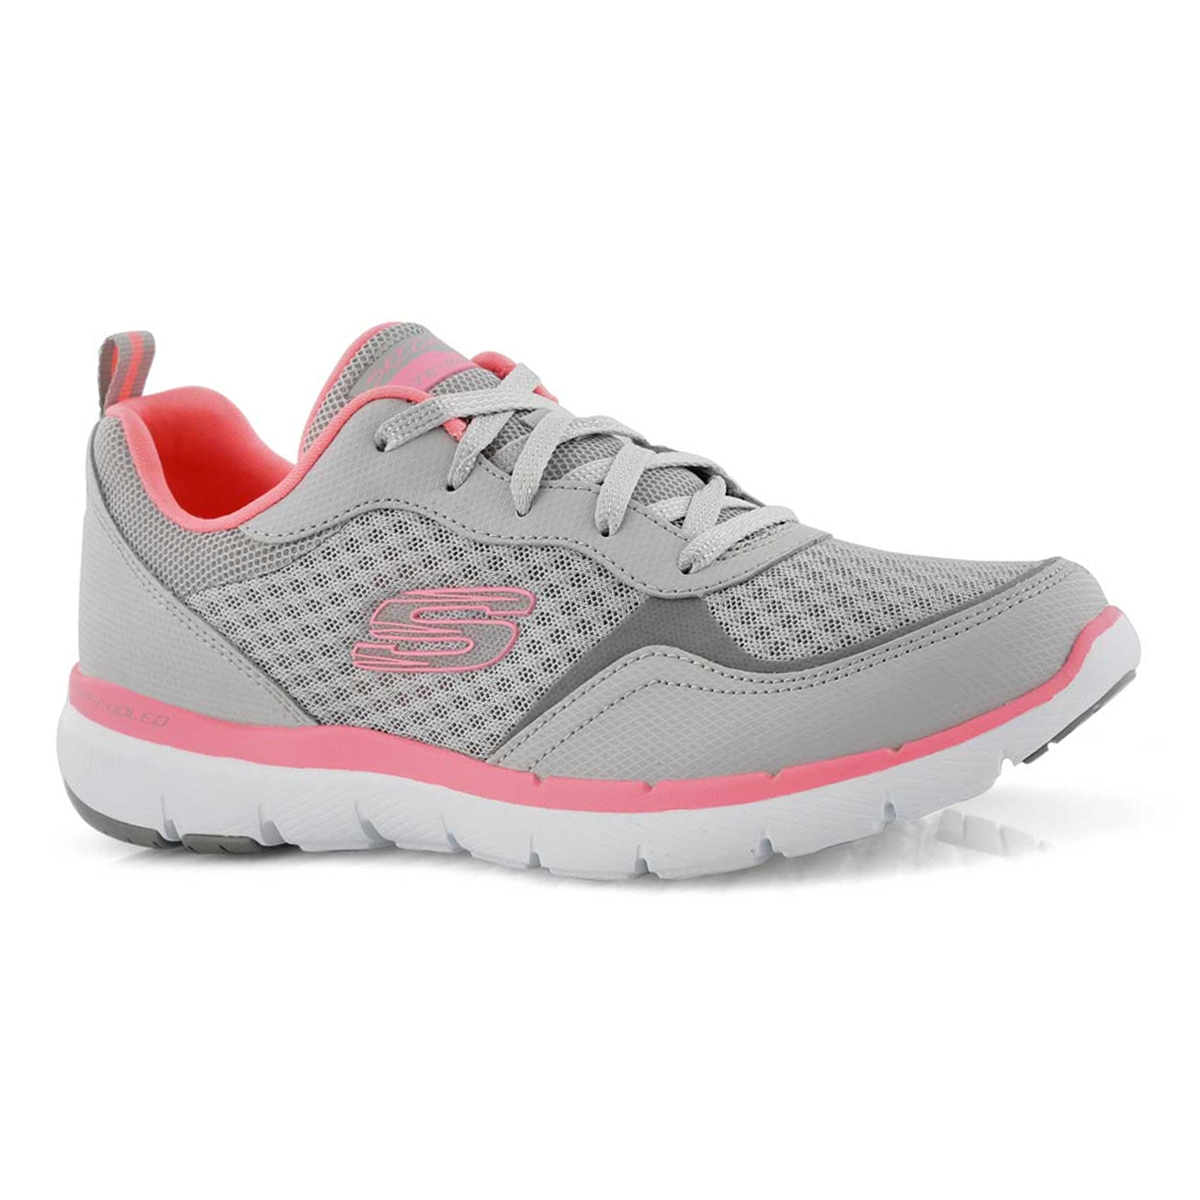 We Review: Skechers Flex Appeal with Memory Foam - The Budget Babe